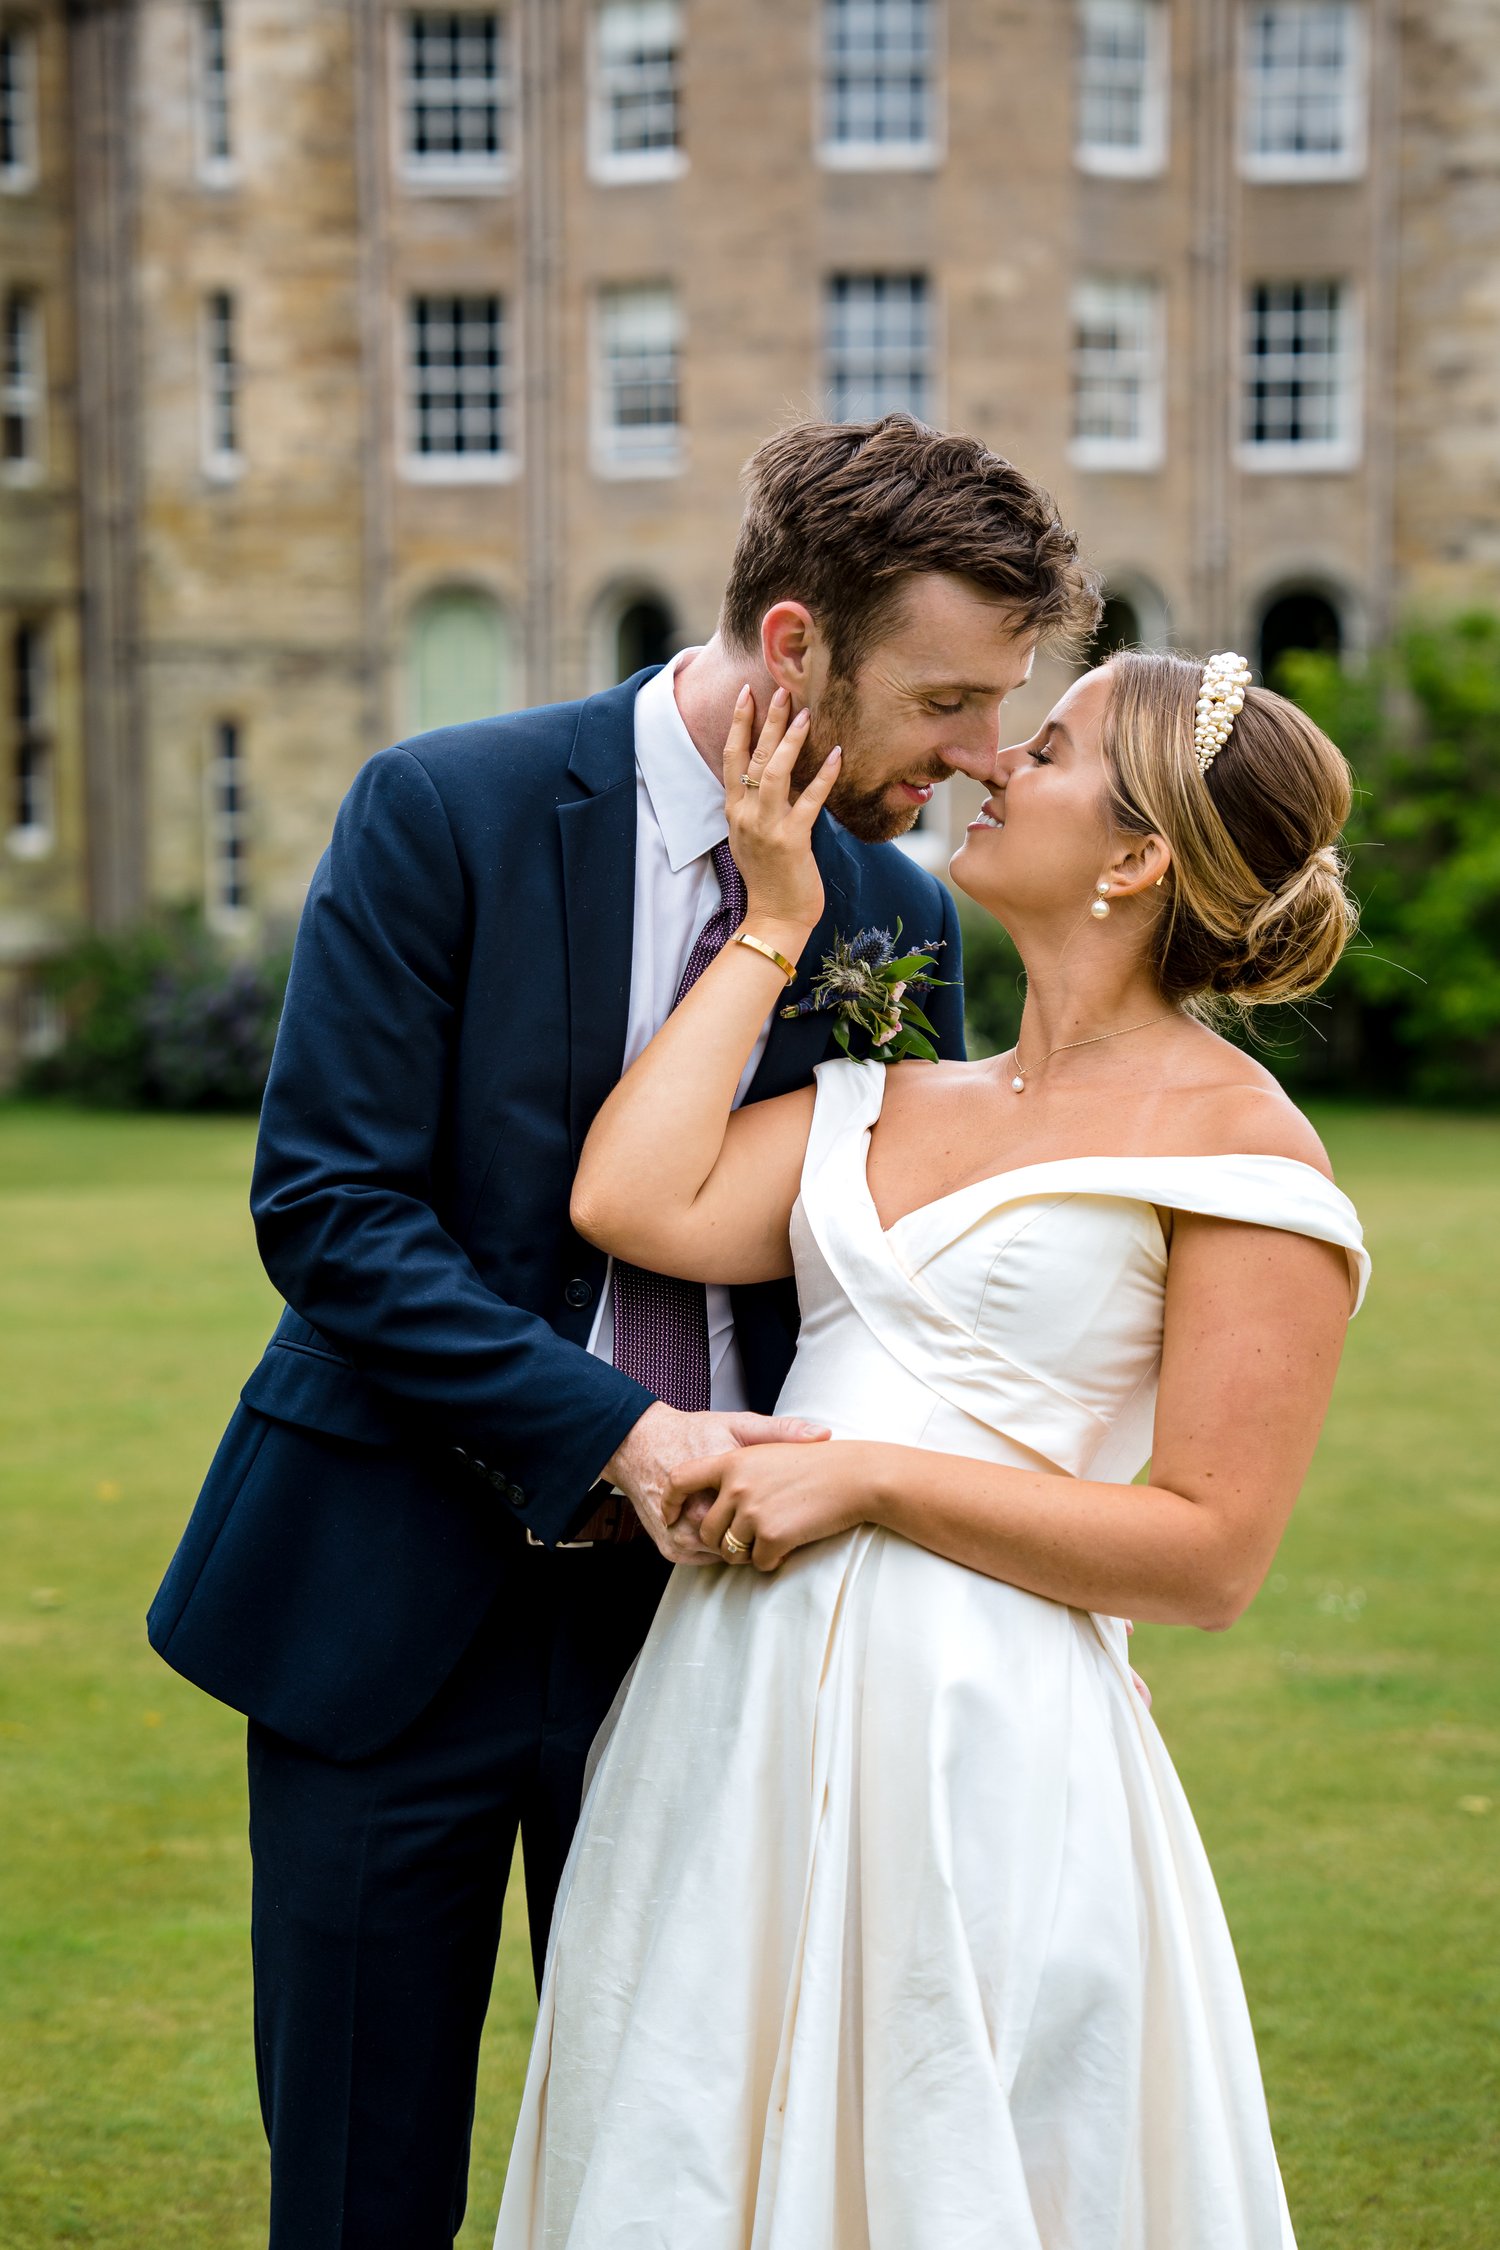 How to Have the Most Luxurious Wedding in Edinburgh — VoS